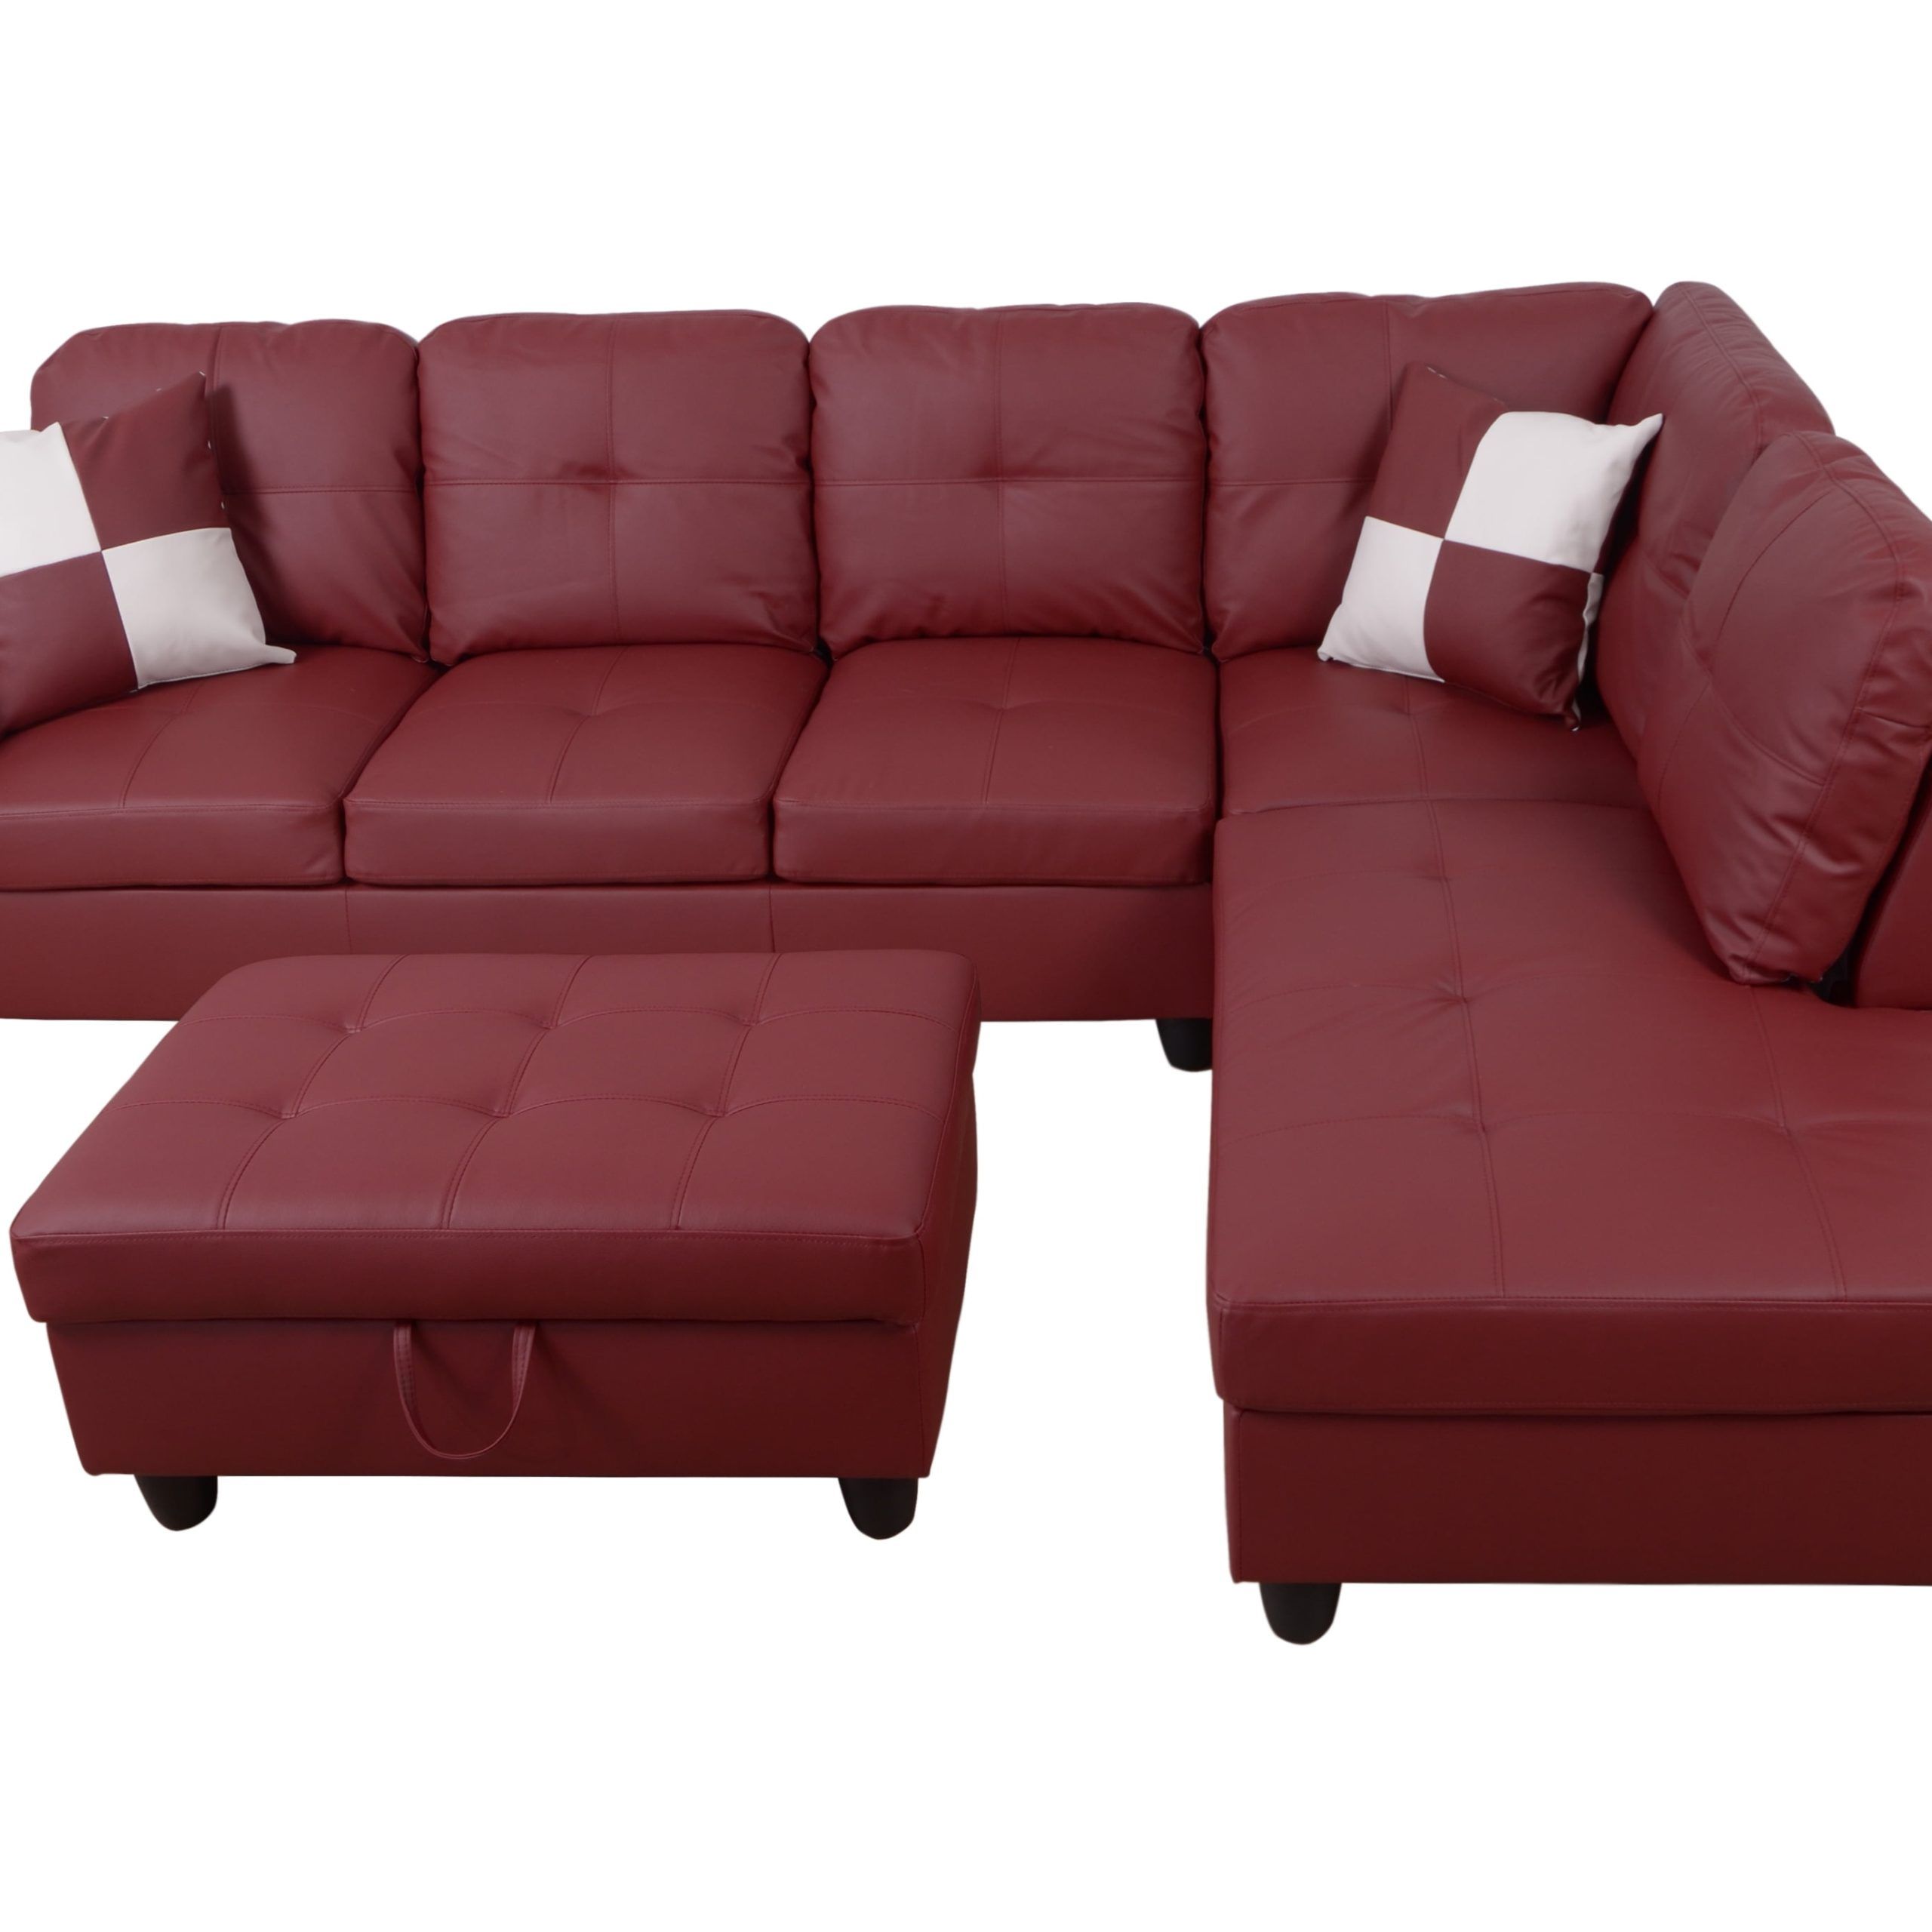 For U Furnishing Classic Red Faux Leather Sectional Sofa, Right Facing Throughout Faux Leather Sectional Sofa Sets (View 13 of 21)